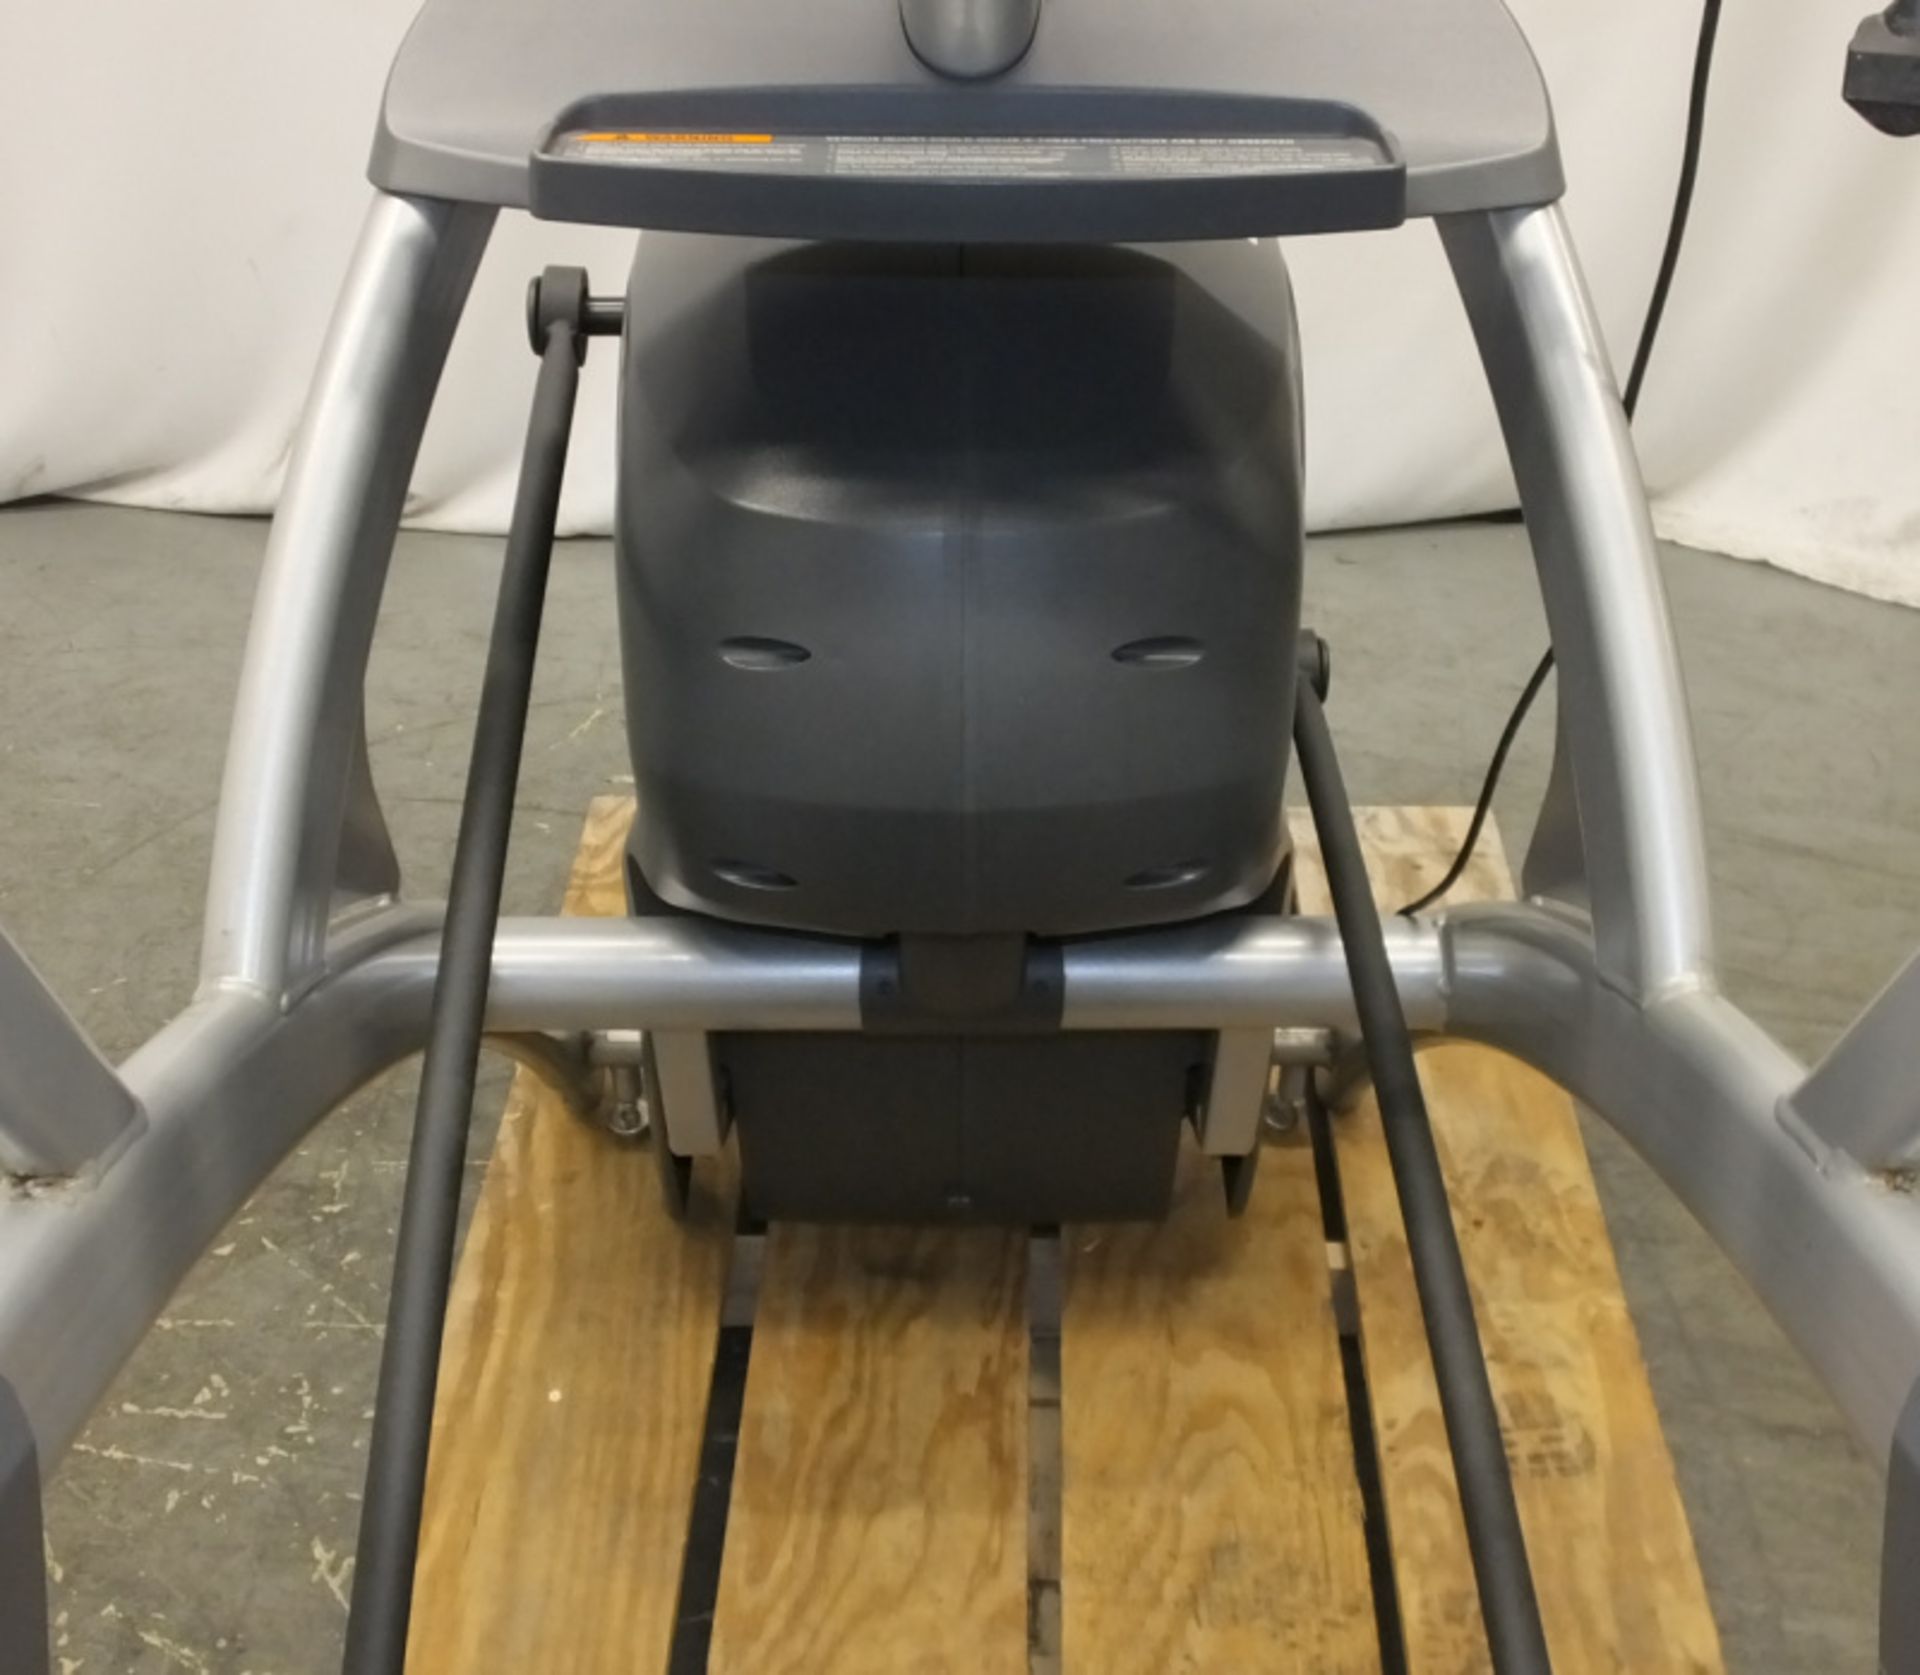 Cybex 750A Total Body ARC Cross Trainer - Image 7 of 19